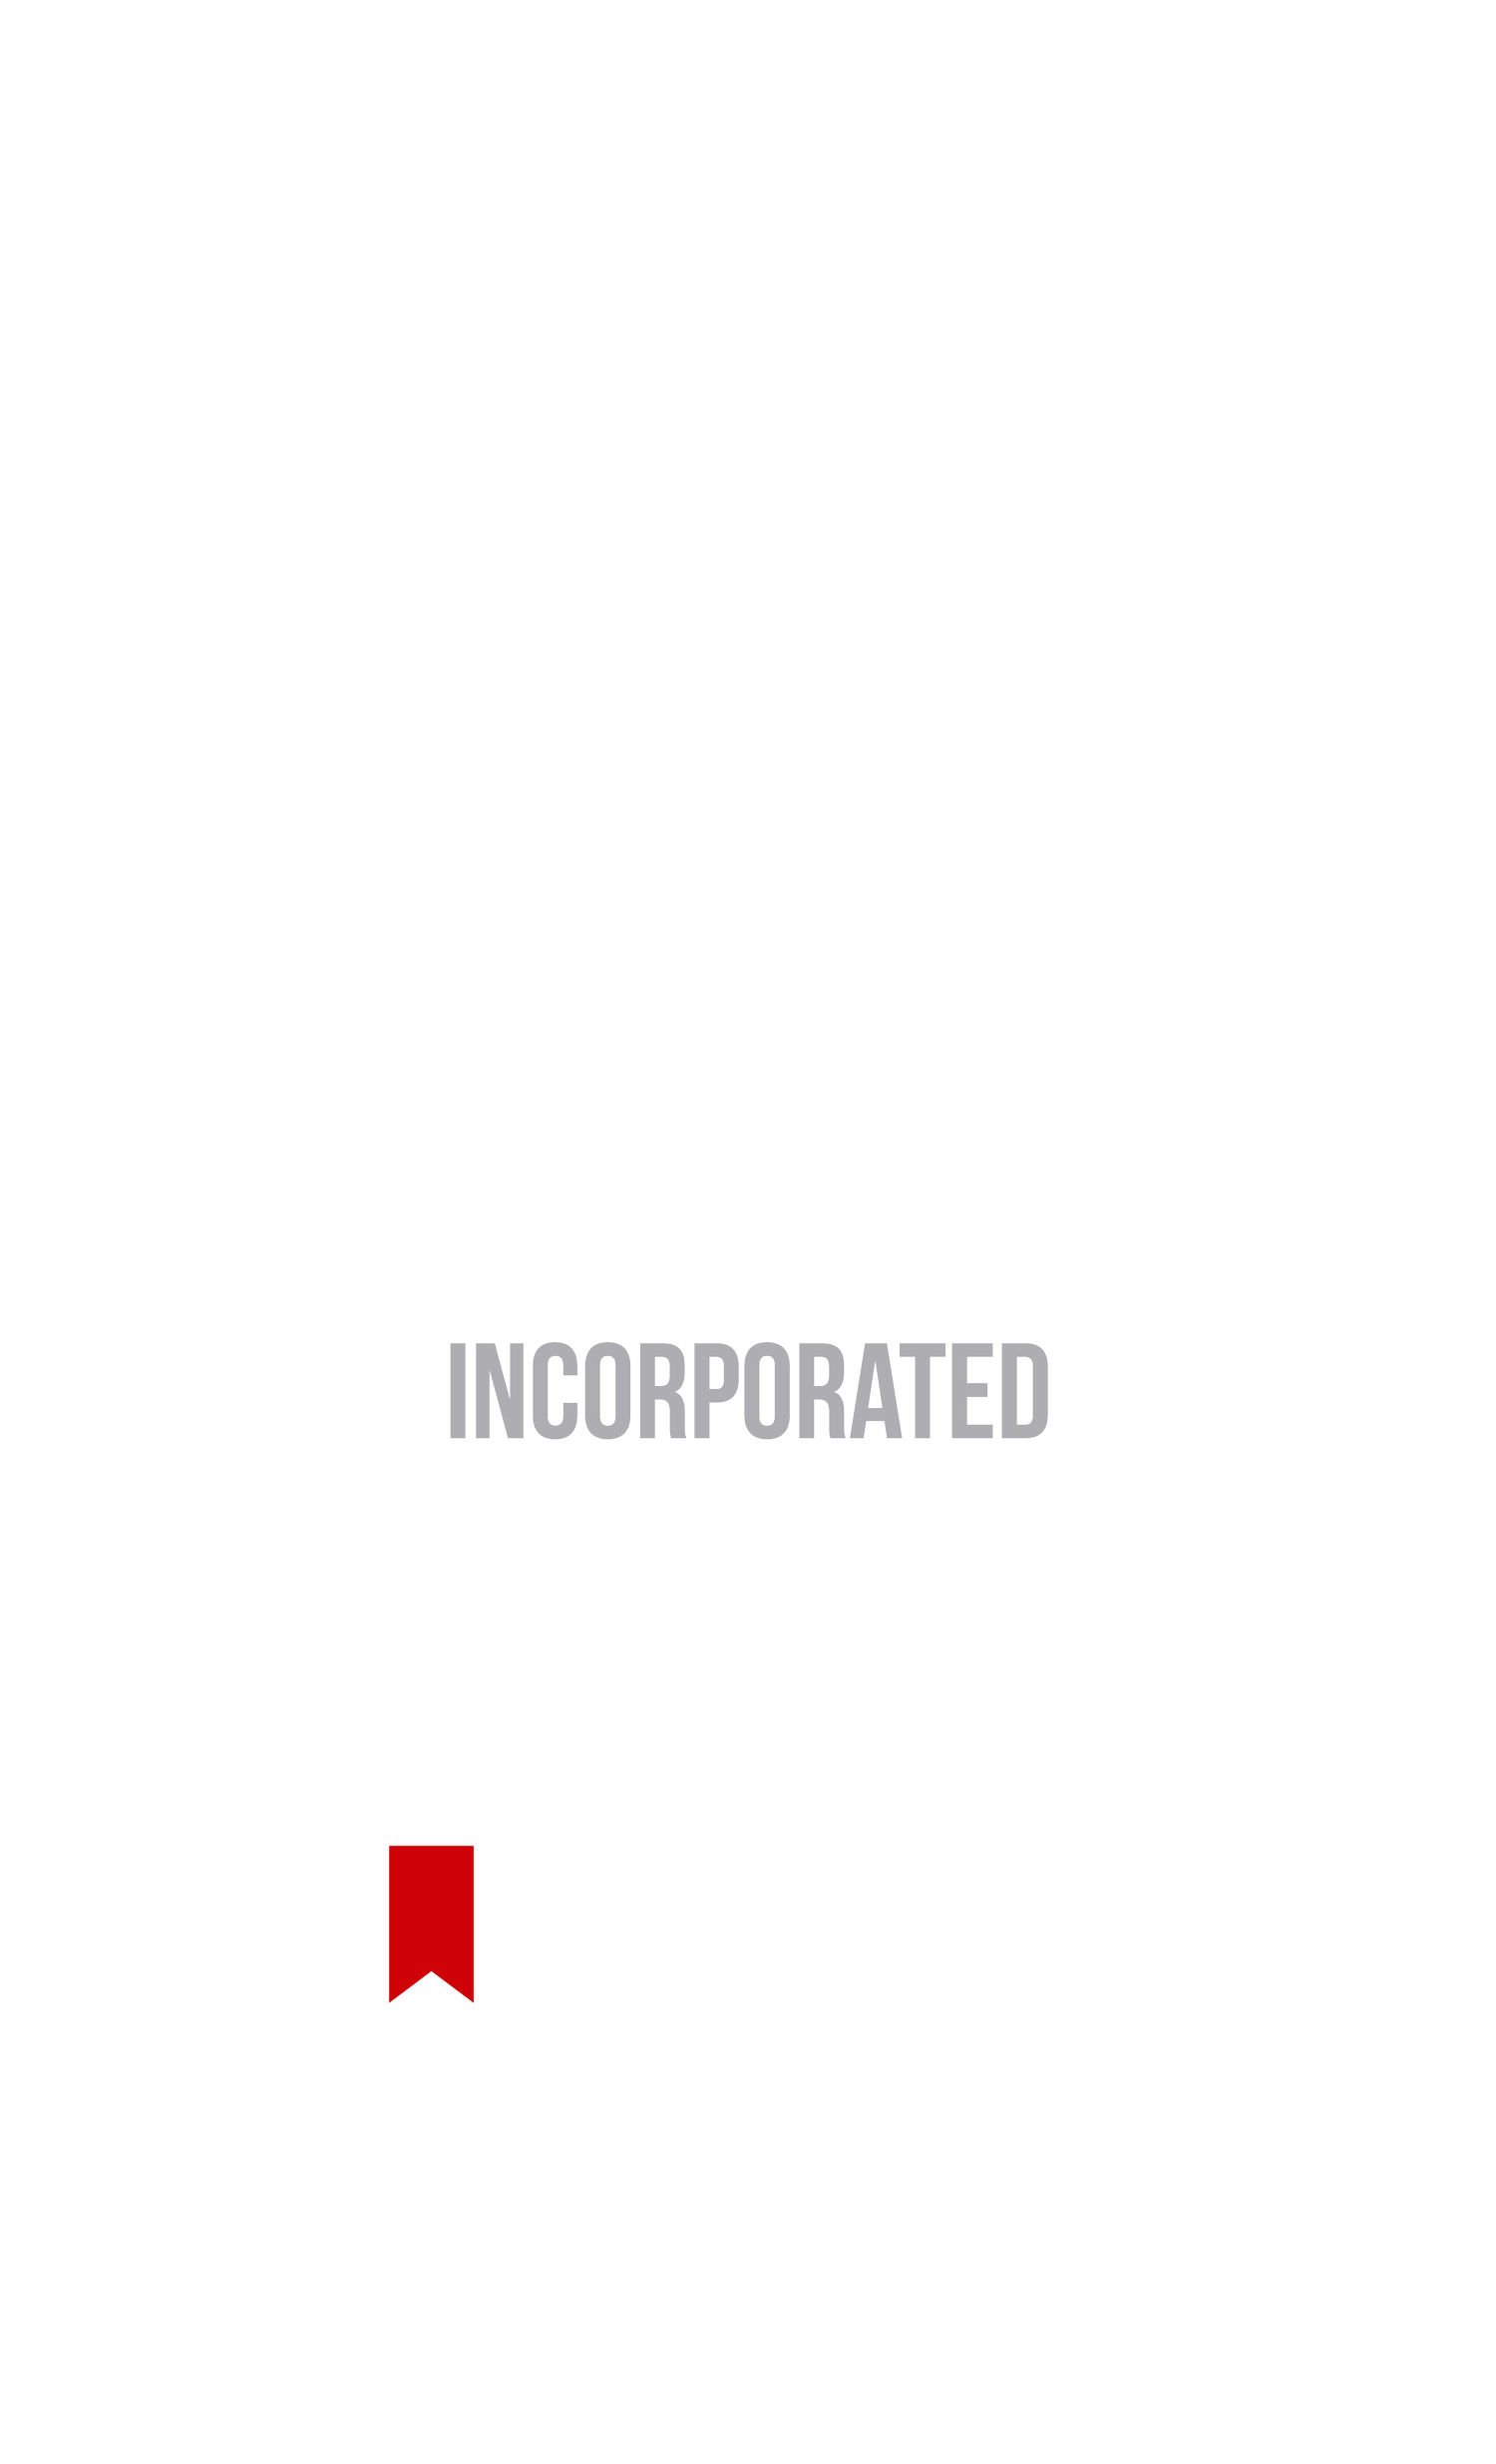 Bible Tracts, Inc.